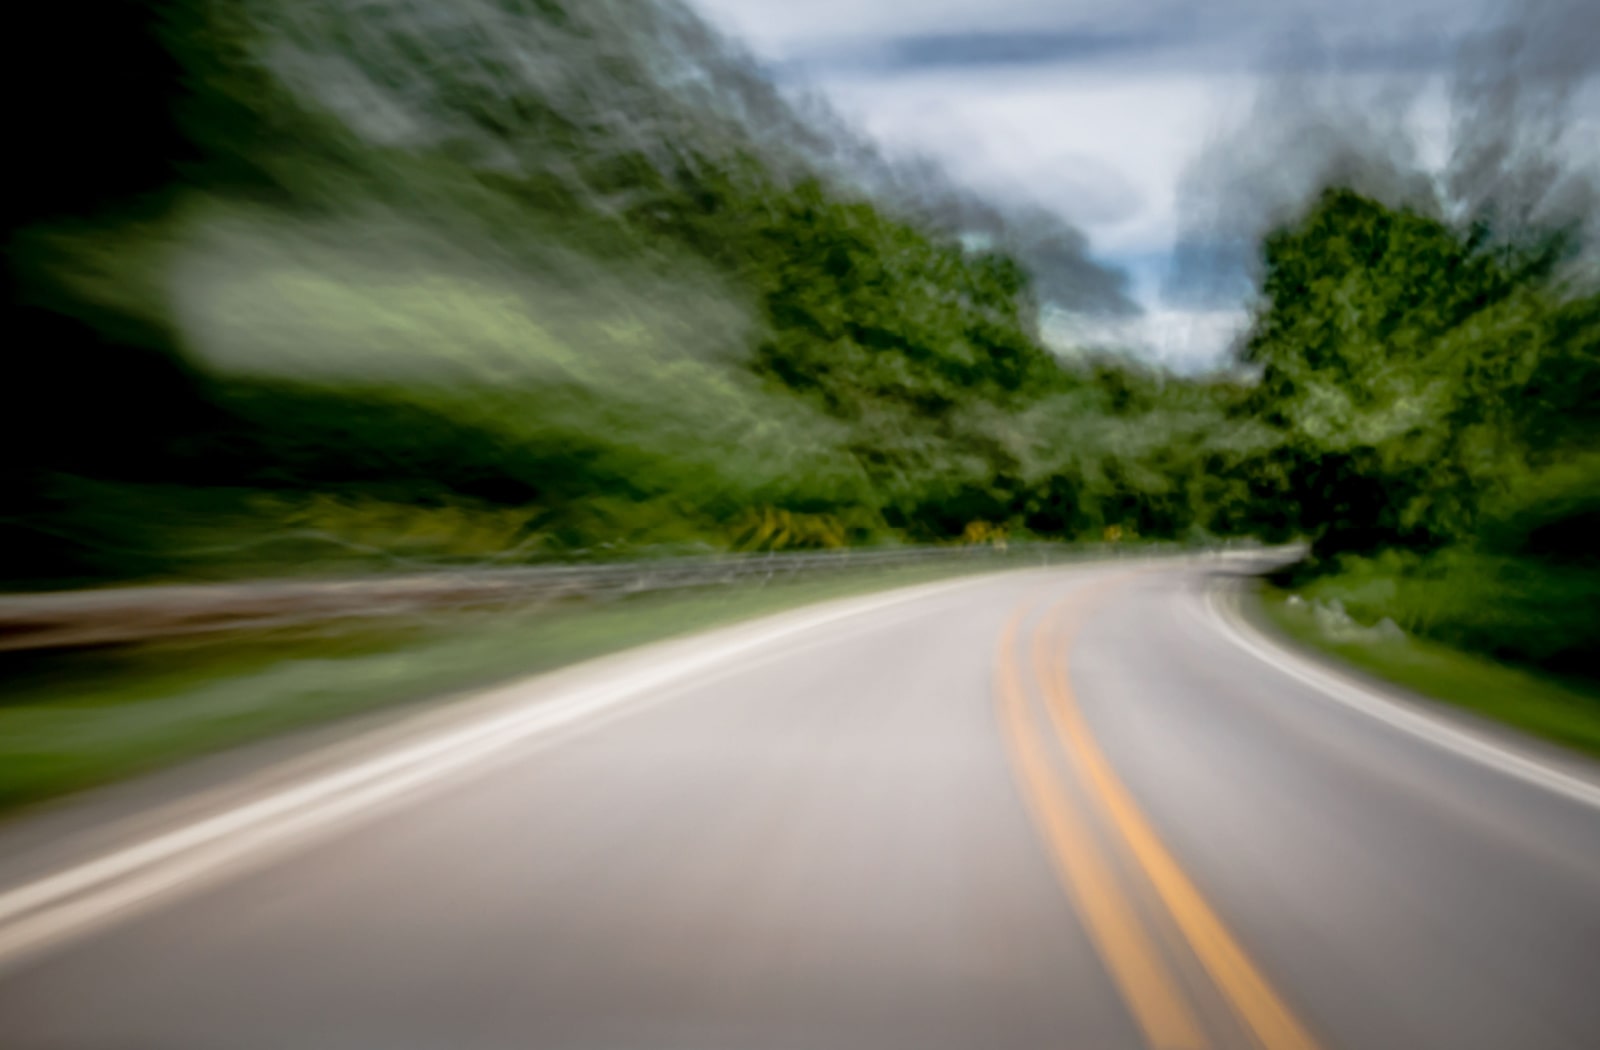 An image of a road that appears to be blurry looking